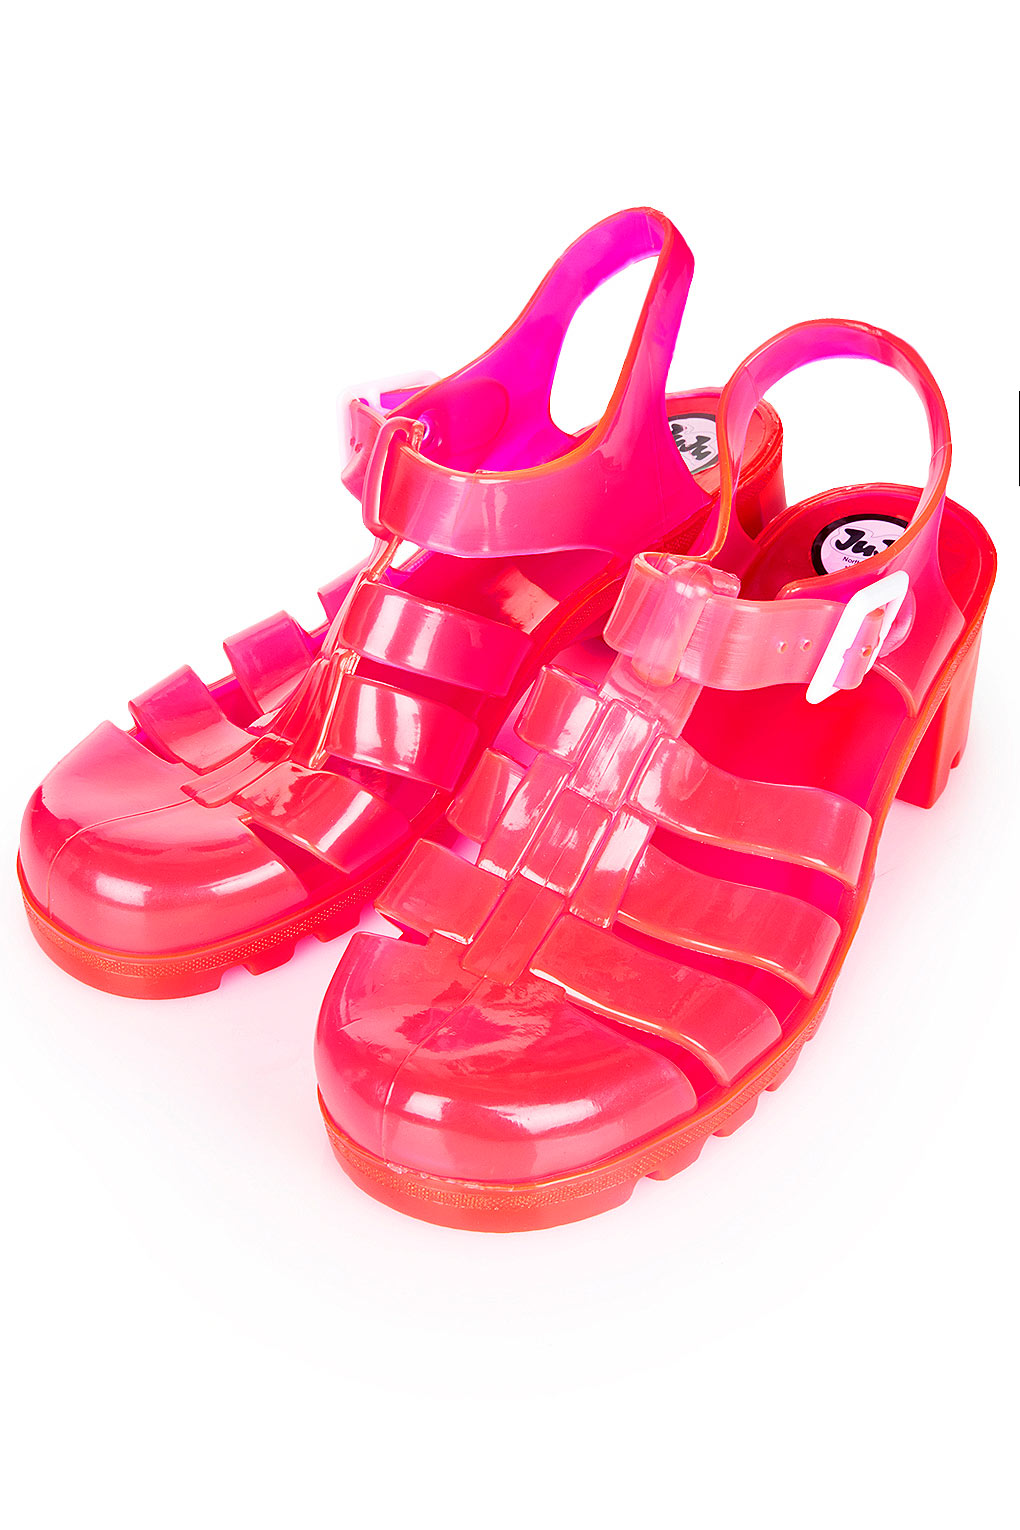 Hunting in Heels: Jelly Sandals; Trending my inner 6 year old